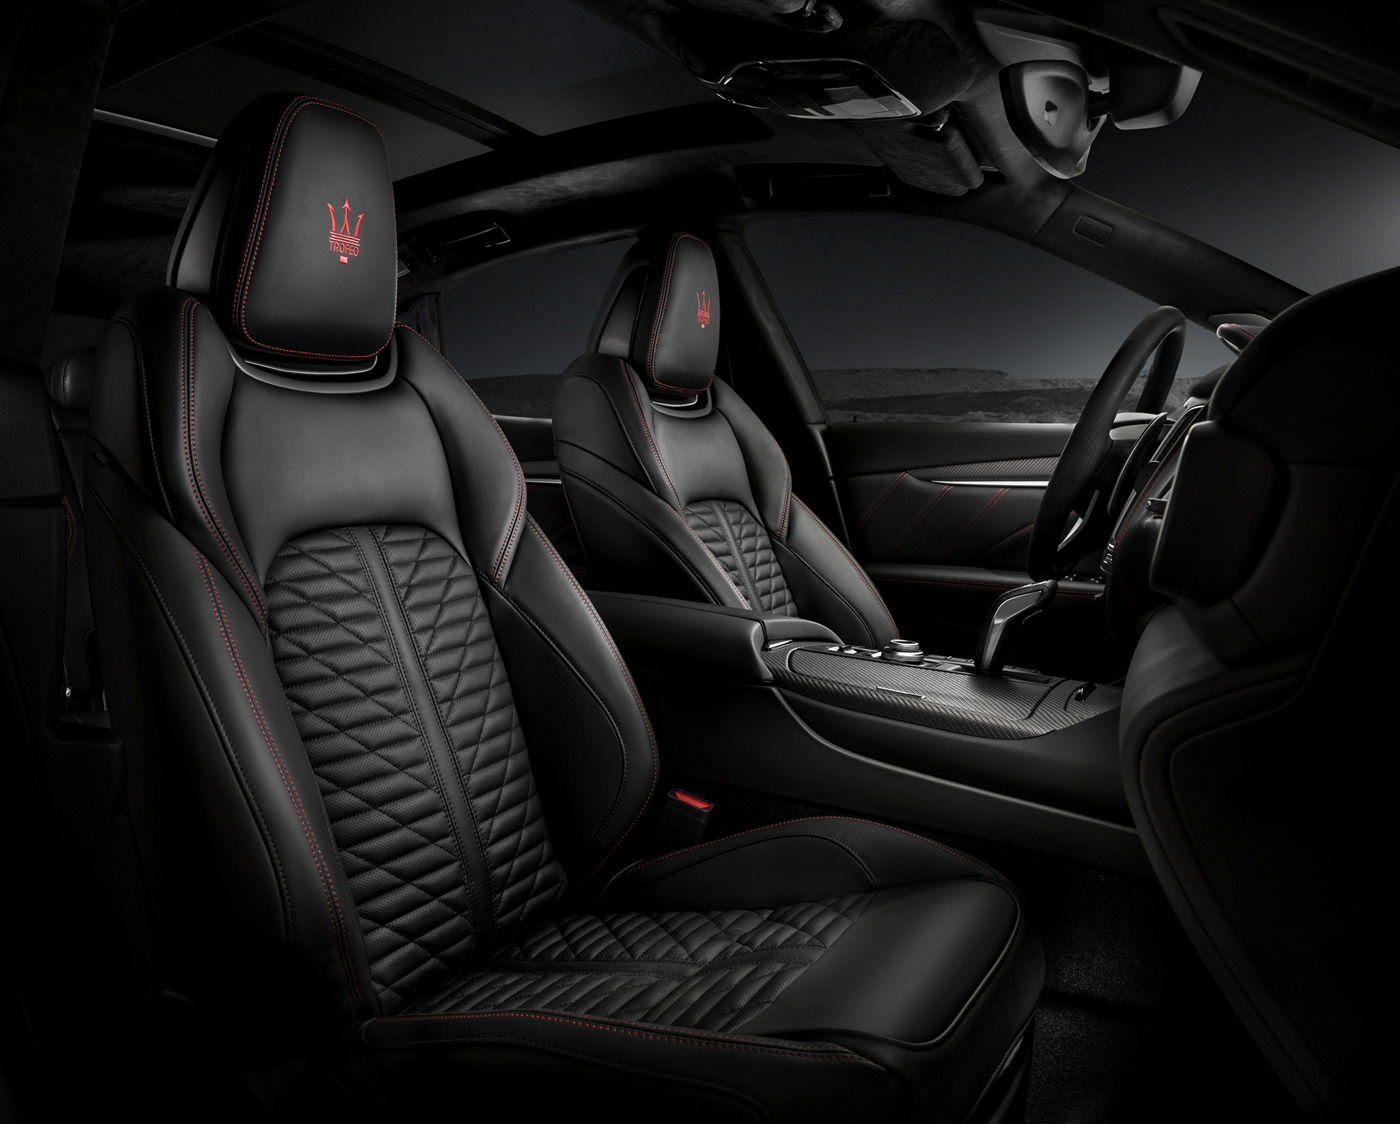 Maserati Levante Trofeo - interior details: dashboard, steering wheel, front seats in black leather and red stitchings